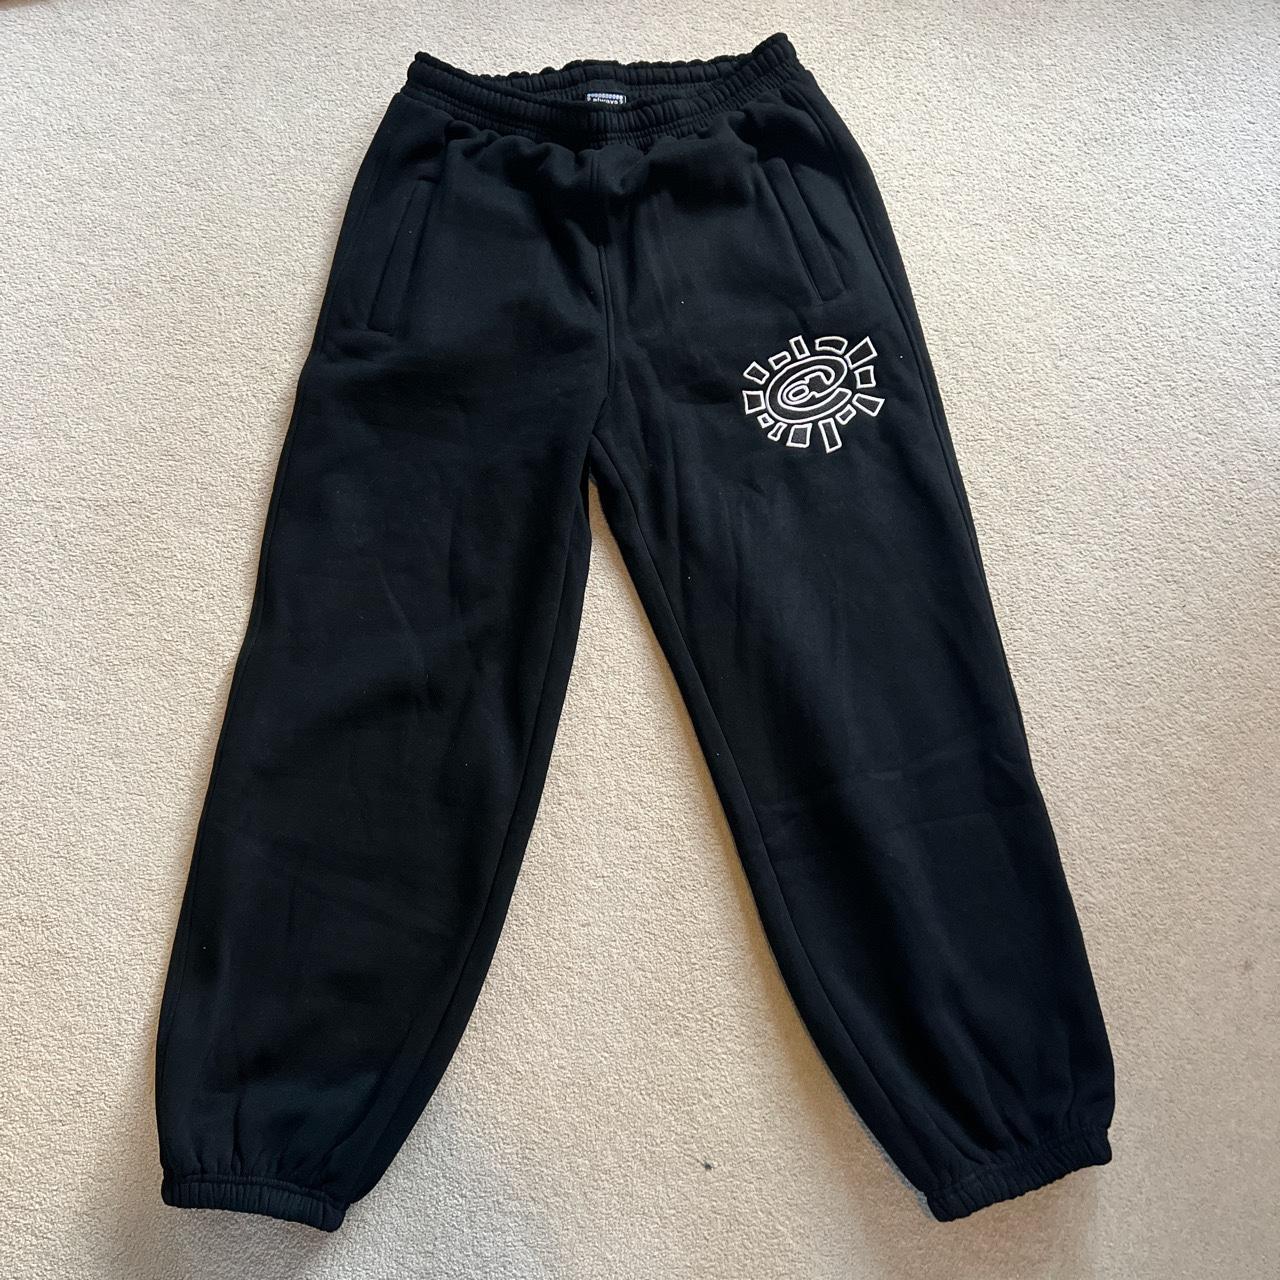 BLACK ADWYSD JOGGERS SIZE L BEEN WORN ONCE - Depop